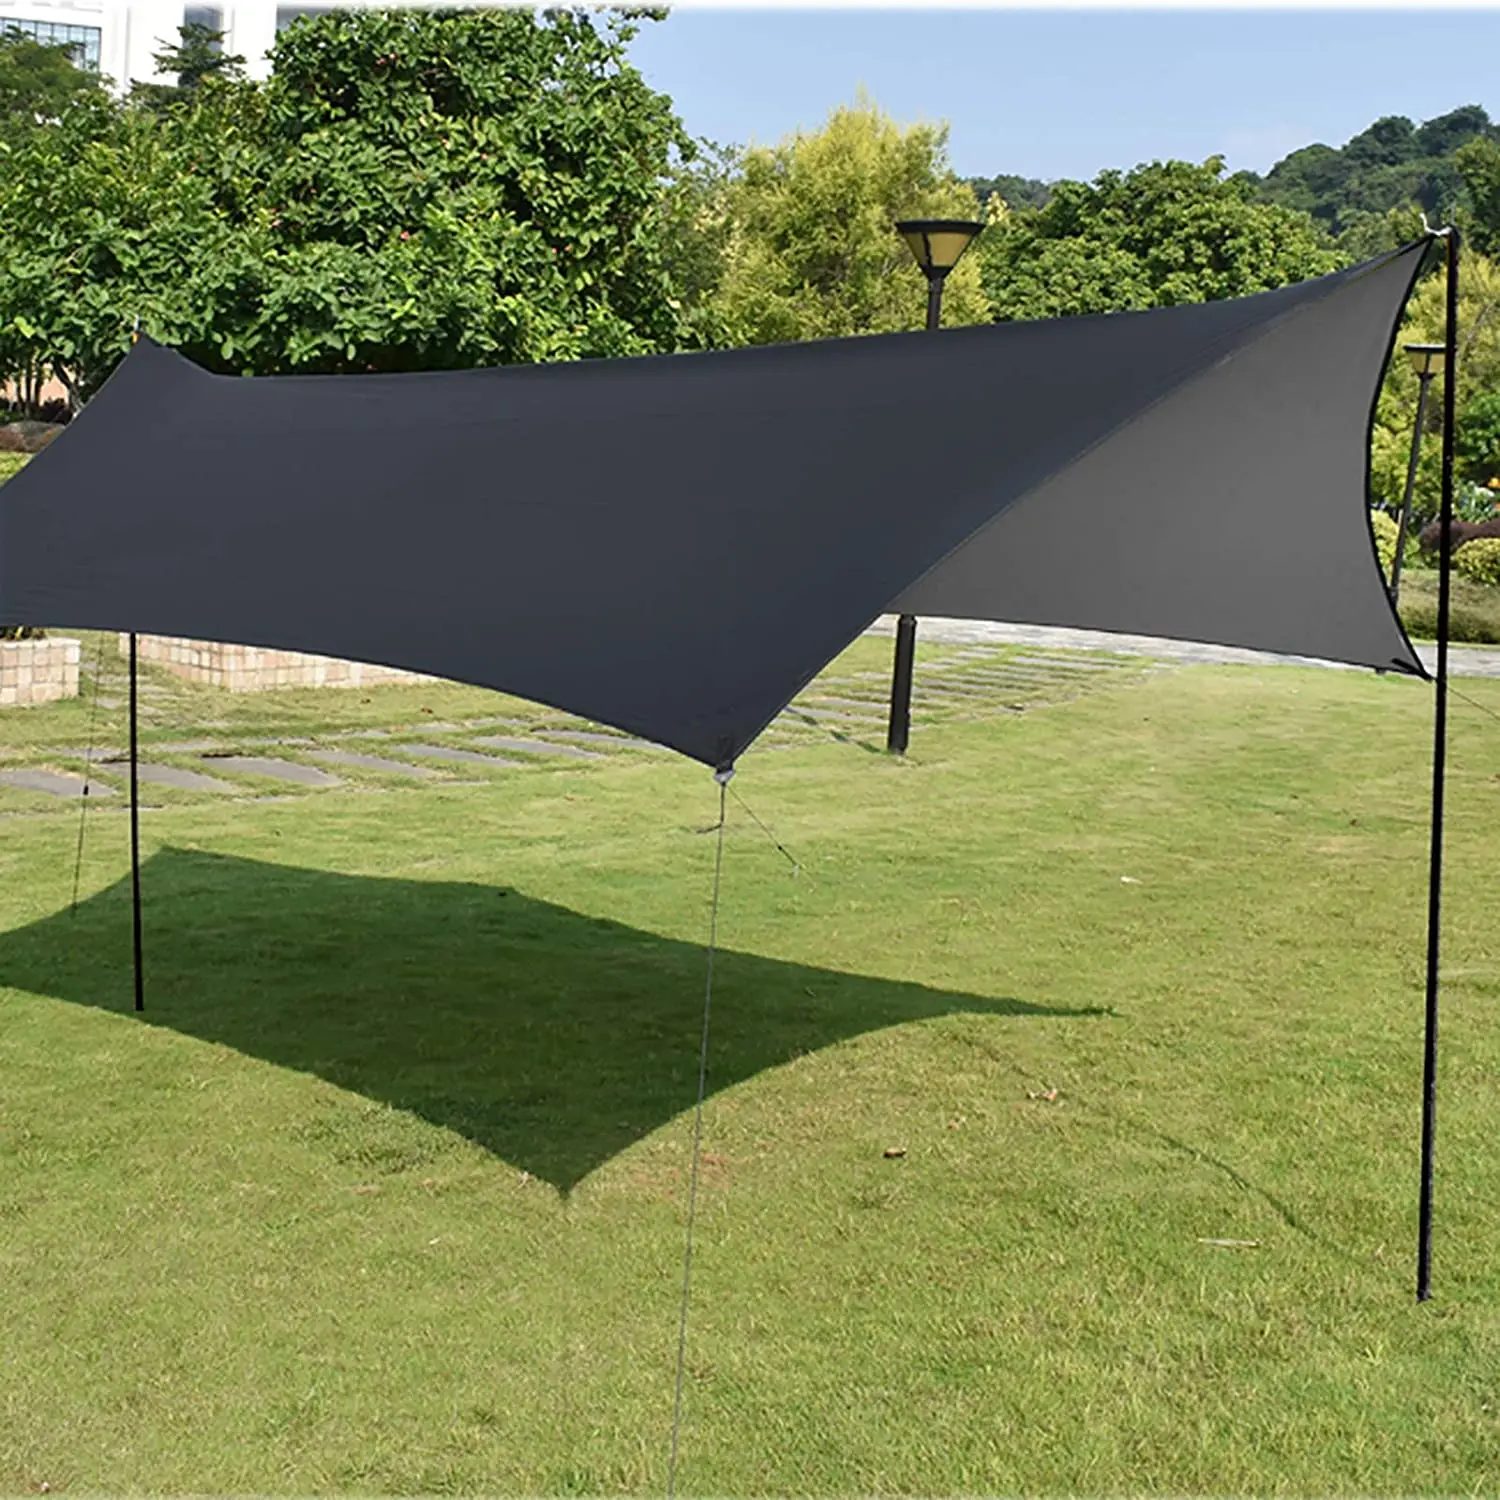 Woqi Anti Uv Wholesale Outdoor Awning Camping Tarp Poles For Vehicles Fly Sheet Beach Tent - Buy Woqi Uv Wholesale Outdoor Awning Camping Tarp Tent Poles For Vehicles Fly